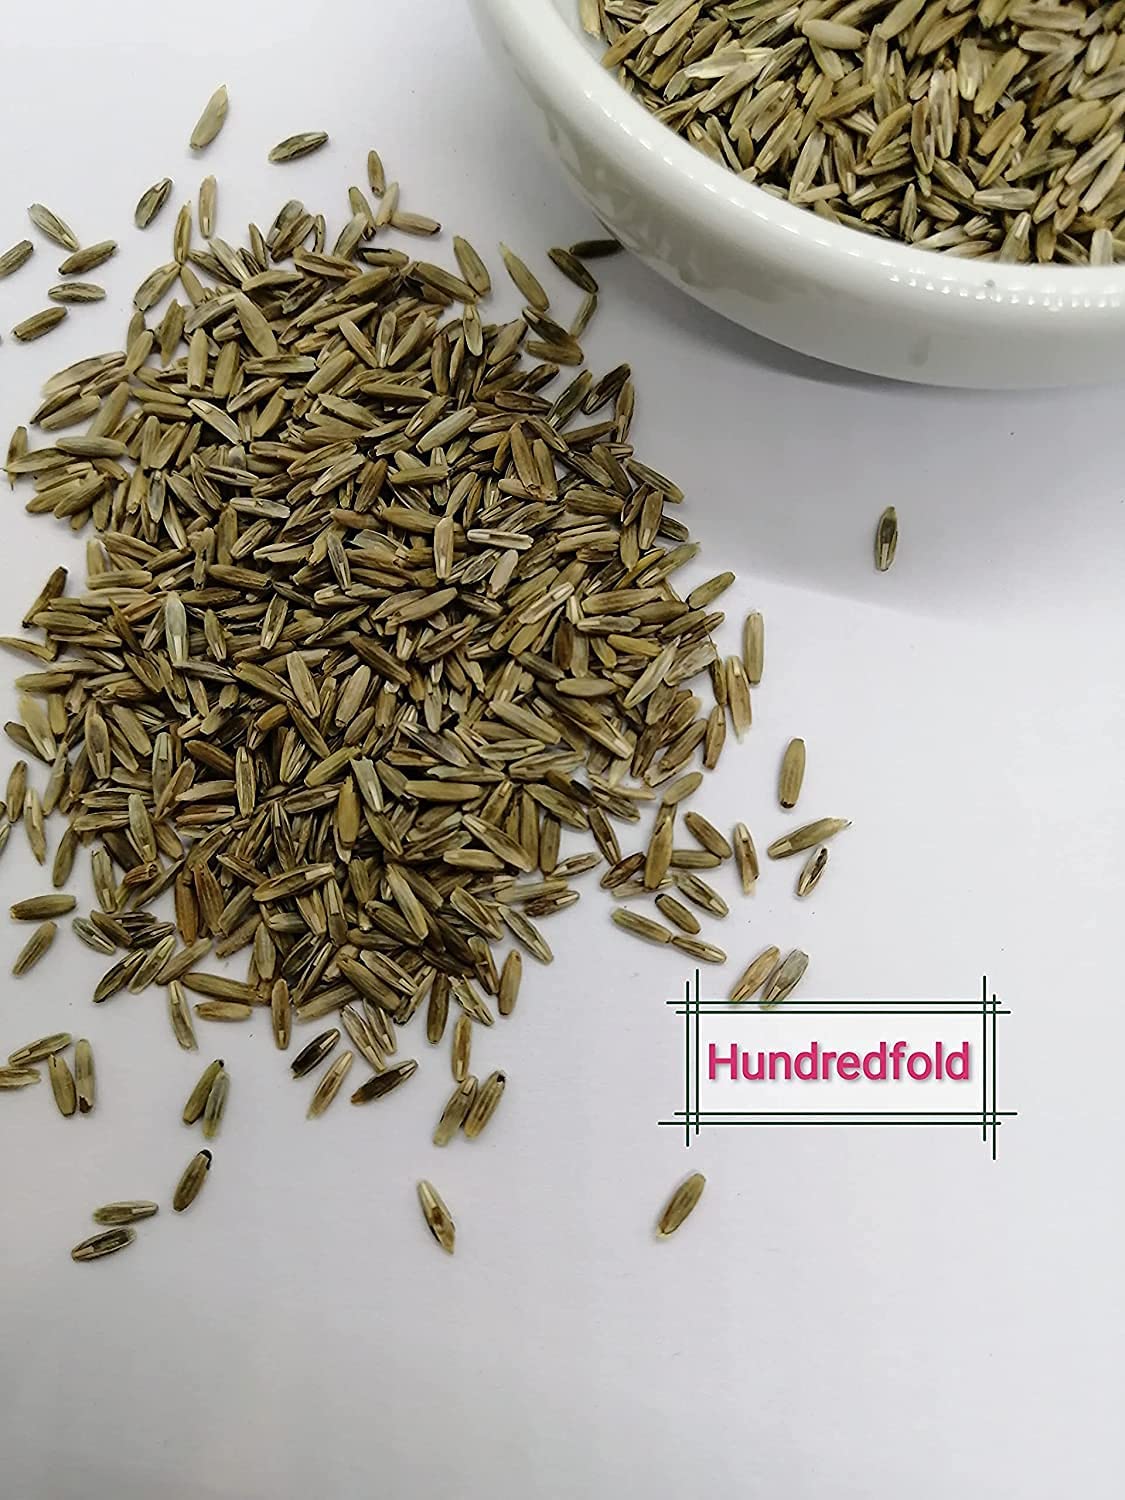 Hundredfold 25 Grams Organic Annual Ryegrass Seeds - Lolium multiflorum, Forage,  Cover Crop, Soil Enrichment and Weed Suppression